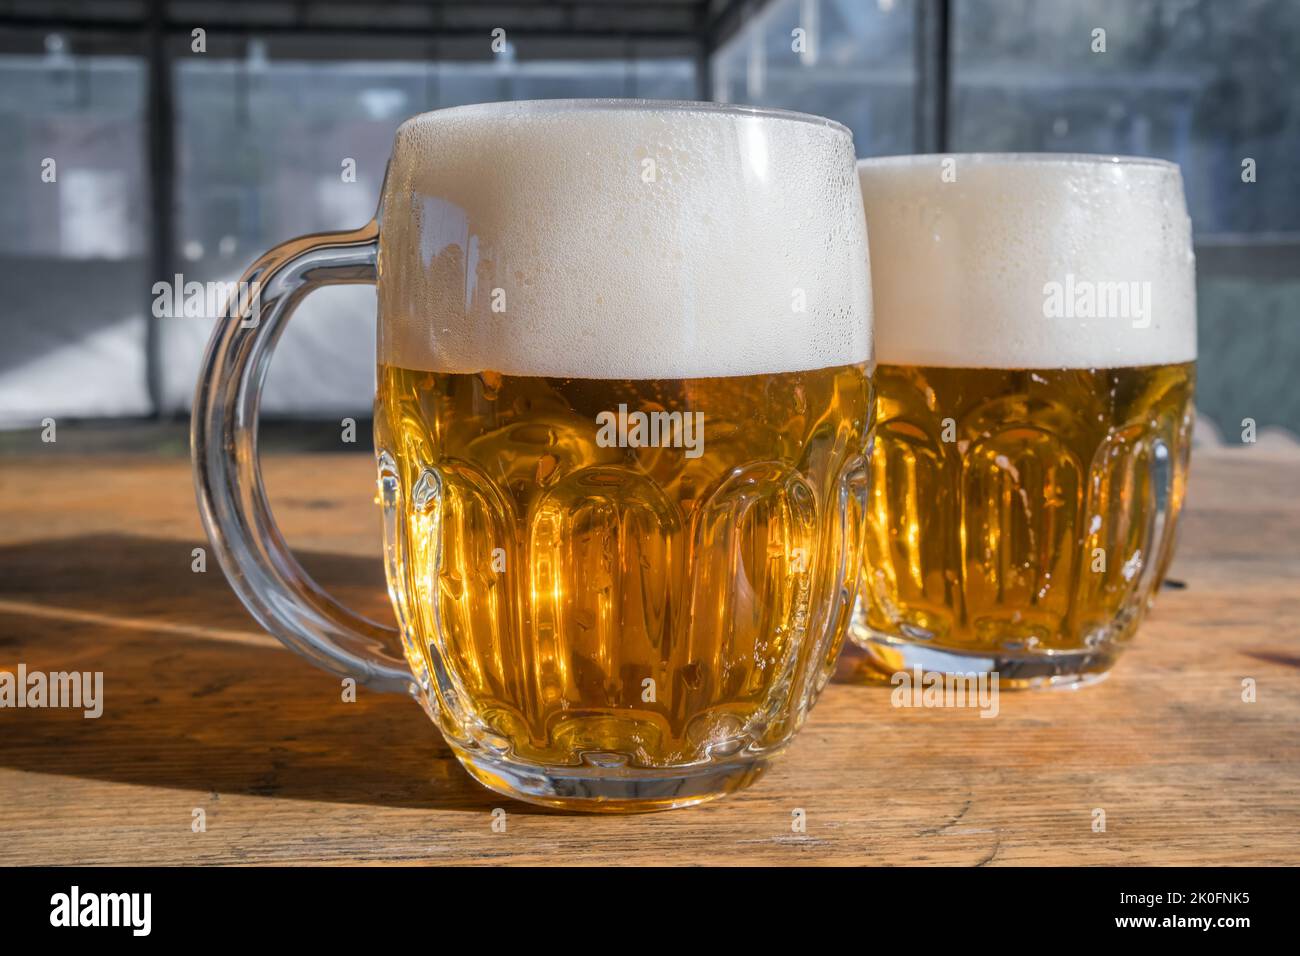 Two mugs of light beer with foam on a wooden table Stock Photo